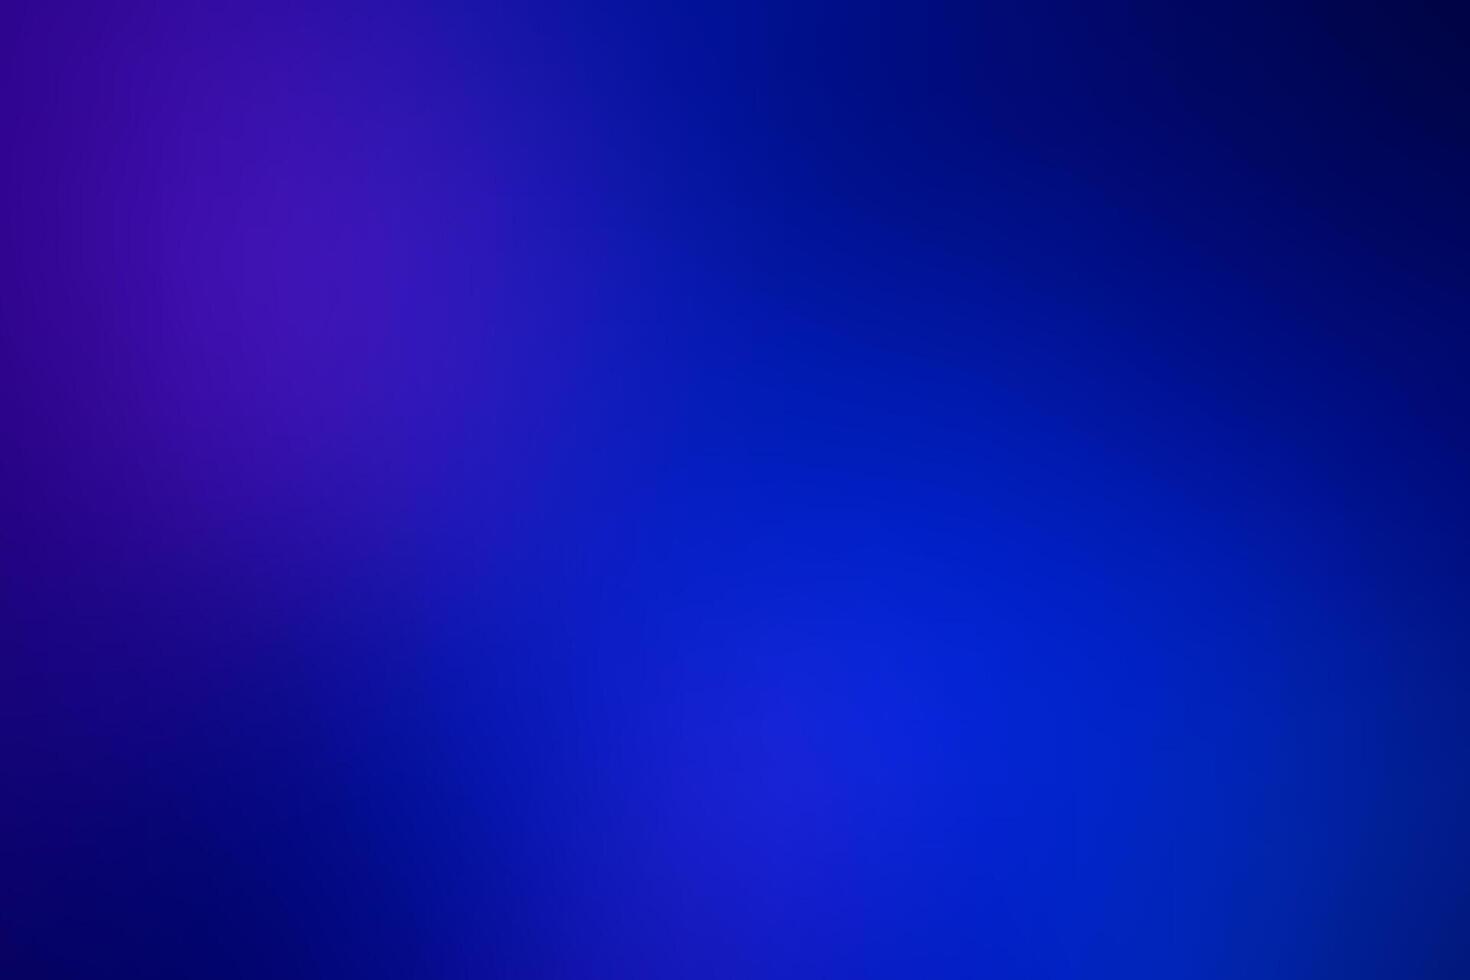 Creative Colorful Blurry Wallpaper Background for Graphic Designers vector